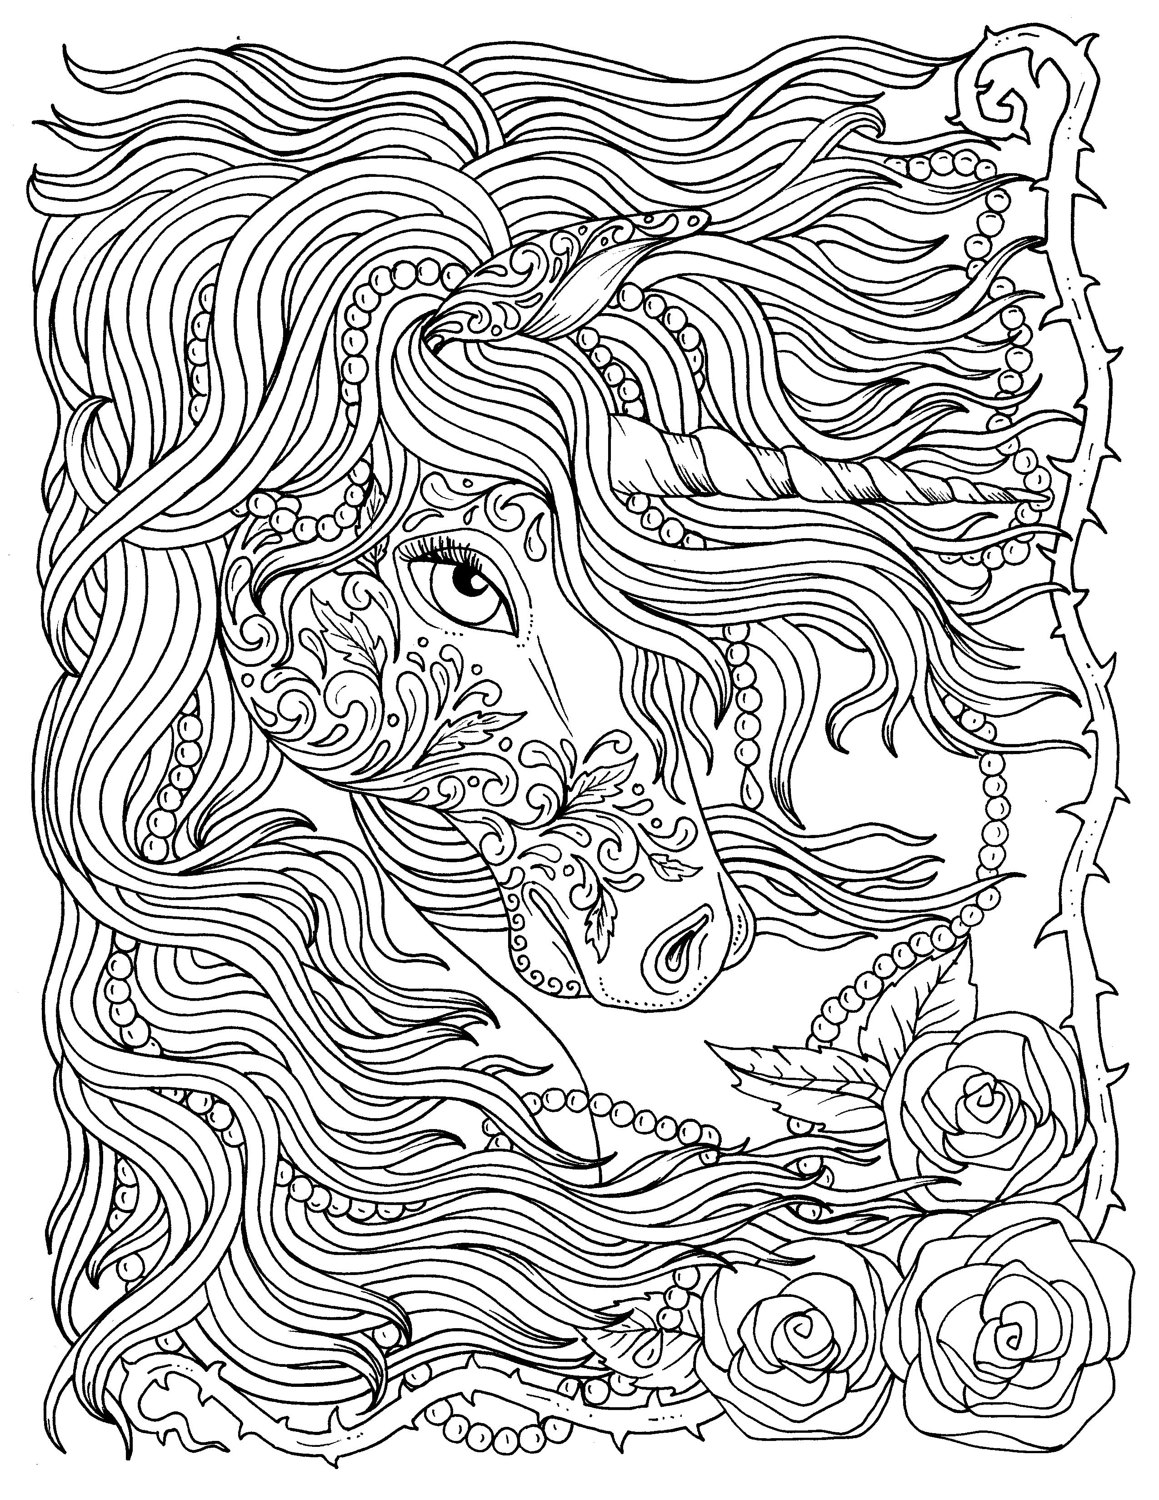 Cool Adult Unicorn 14 Coloring Page